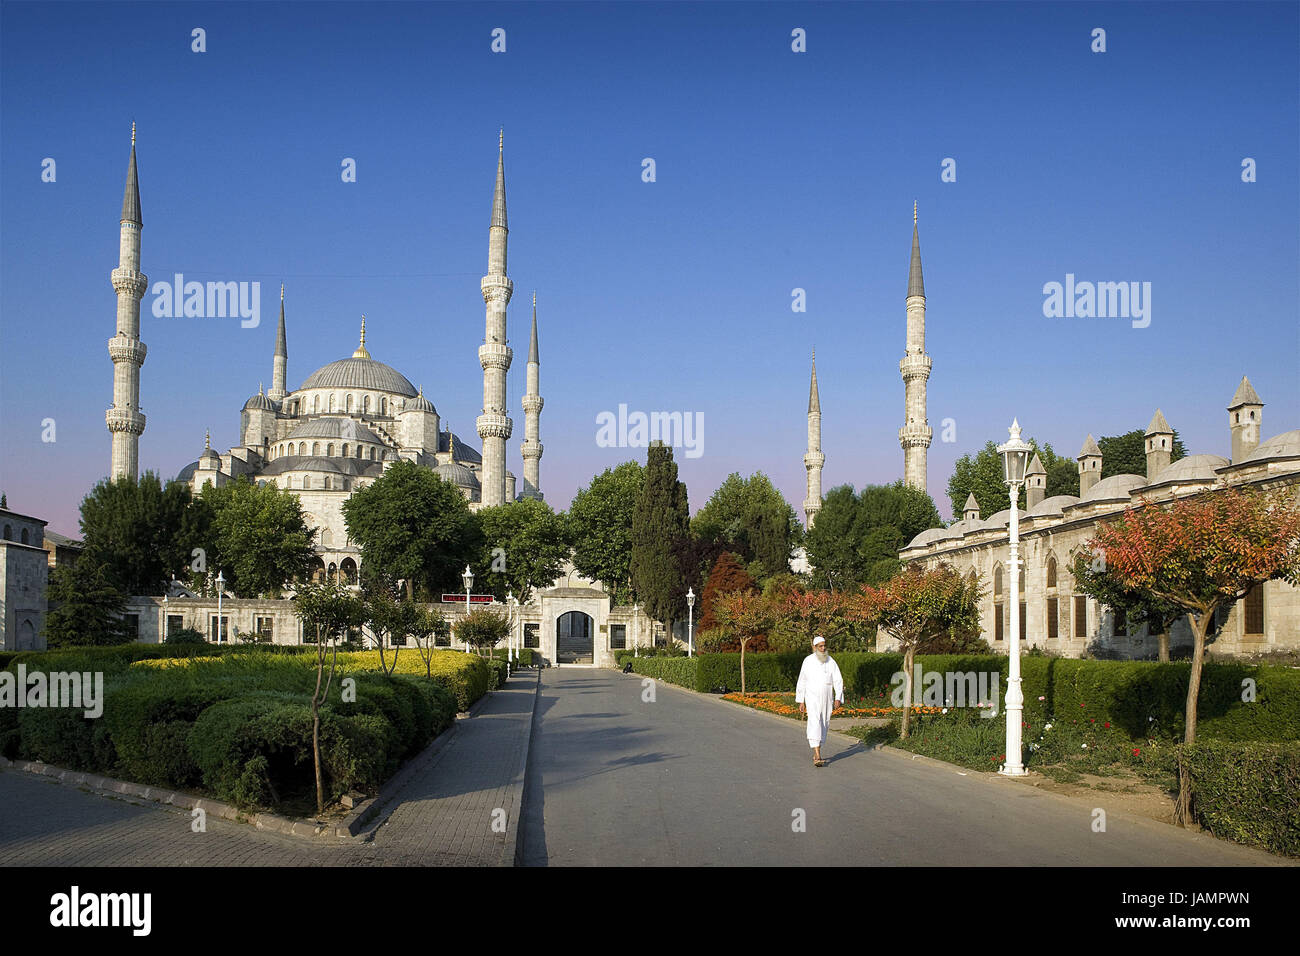 Turkey,Istanbul,sultan Ahmet Camii,'blue mosque',passer-by,no model release,town,city,metropolis,port,culture,faith,religion,Islam,structure,historically,architecture,church,sacred construction,Sultan-Ahmet-Camii,sultan's Ahmed's mosque,mosque,domed building,towers,landmarks,places of interest,minarets,domes,outside,trees,people,heavens,blue,cloudless, Stock Photo